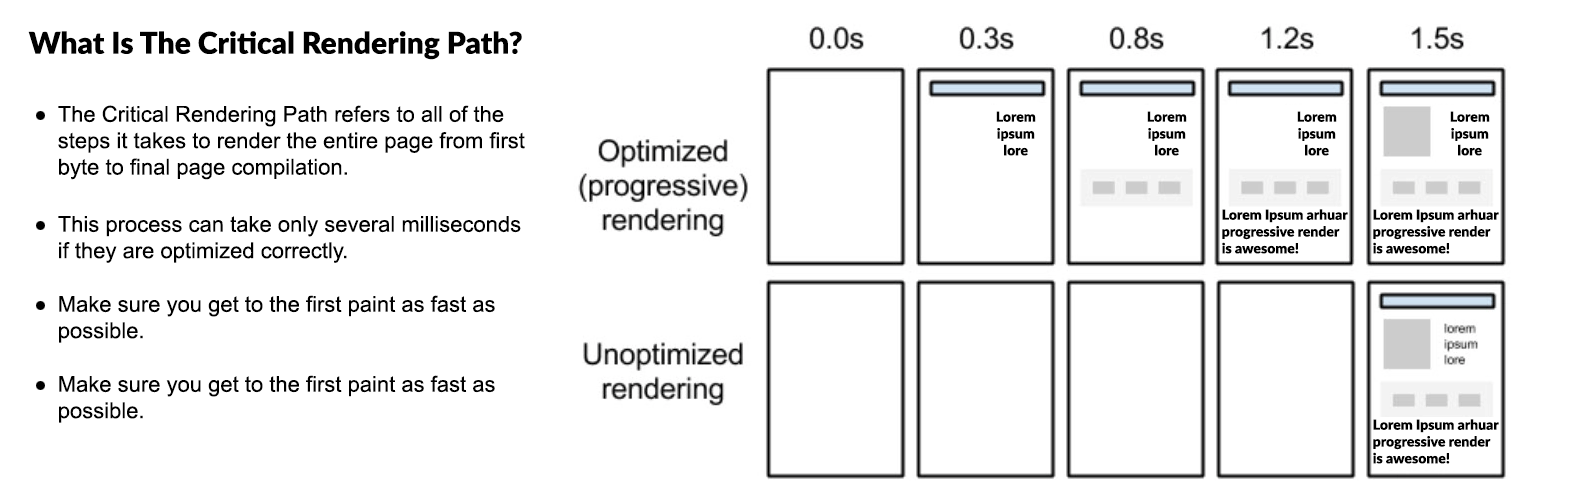 Graphic showing the steps of the critical rendering path of a typical webpage.